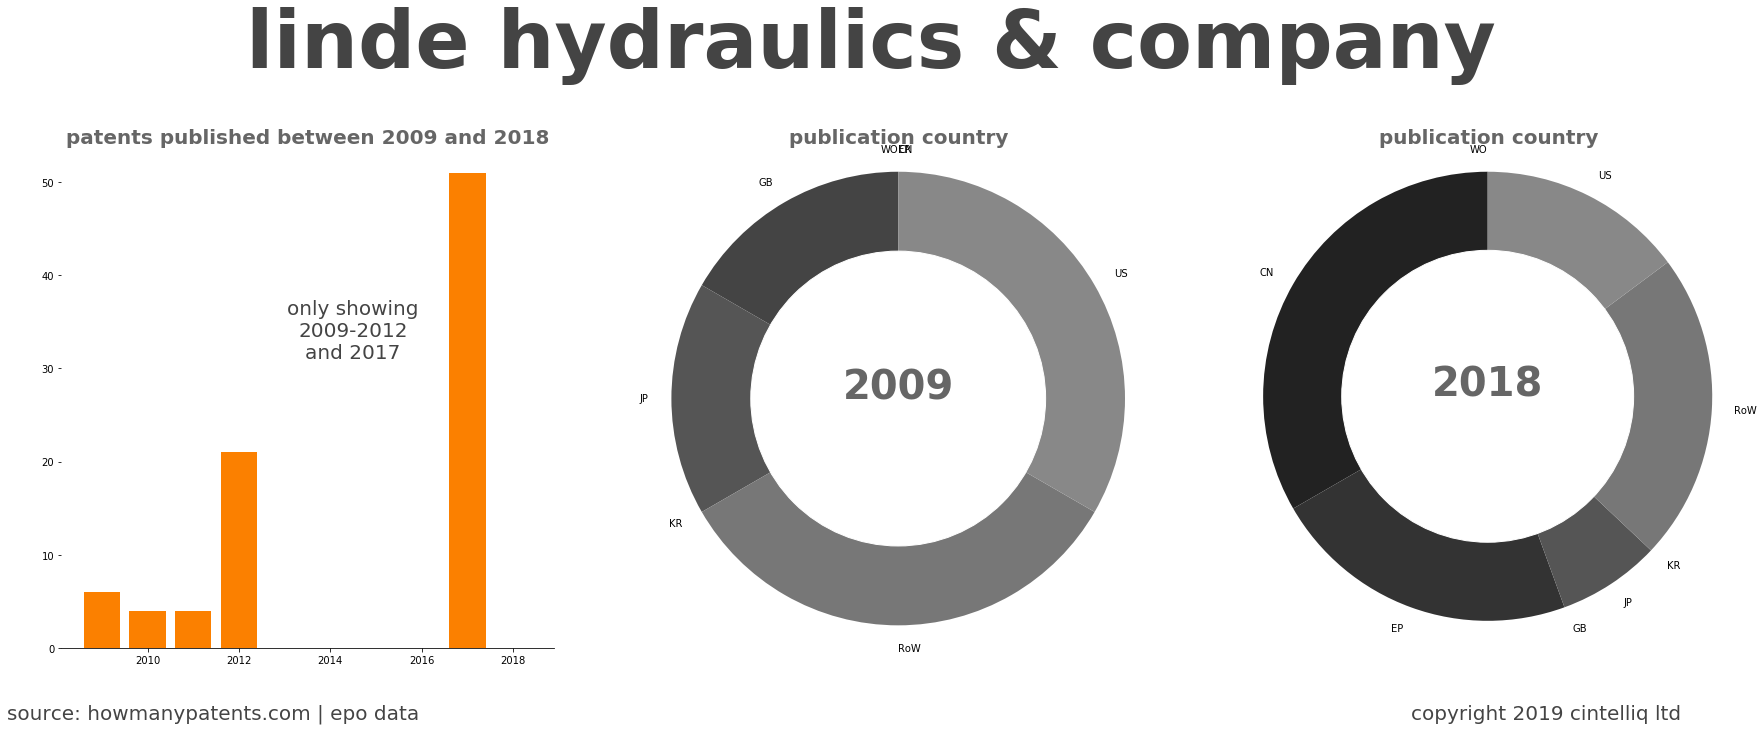 summary of patents for Linde Hydraulics & Company